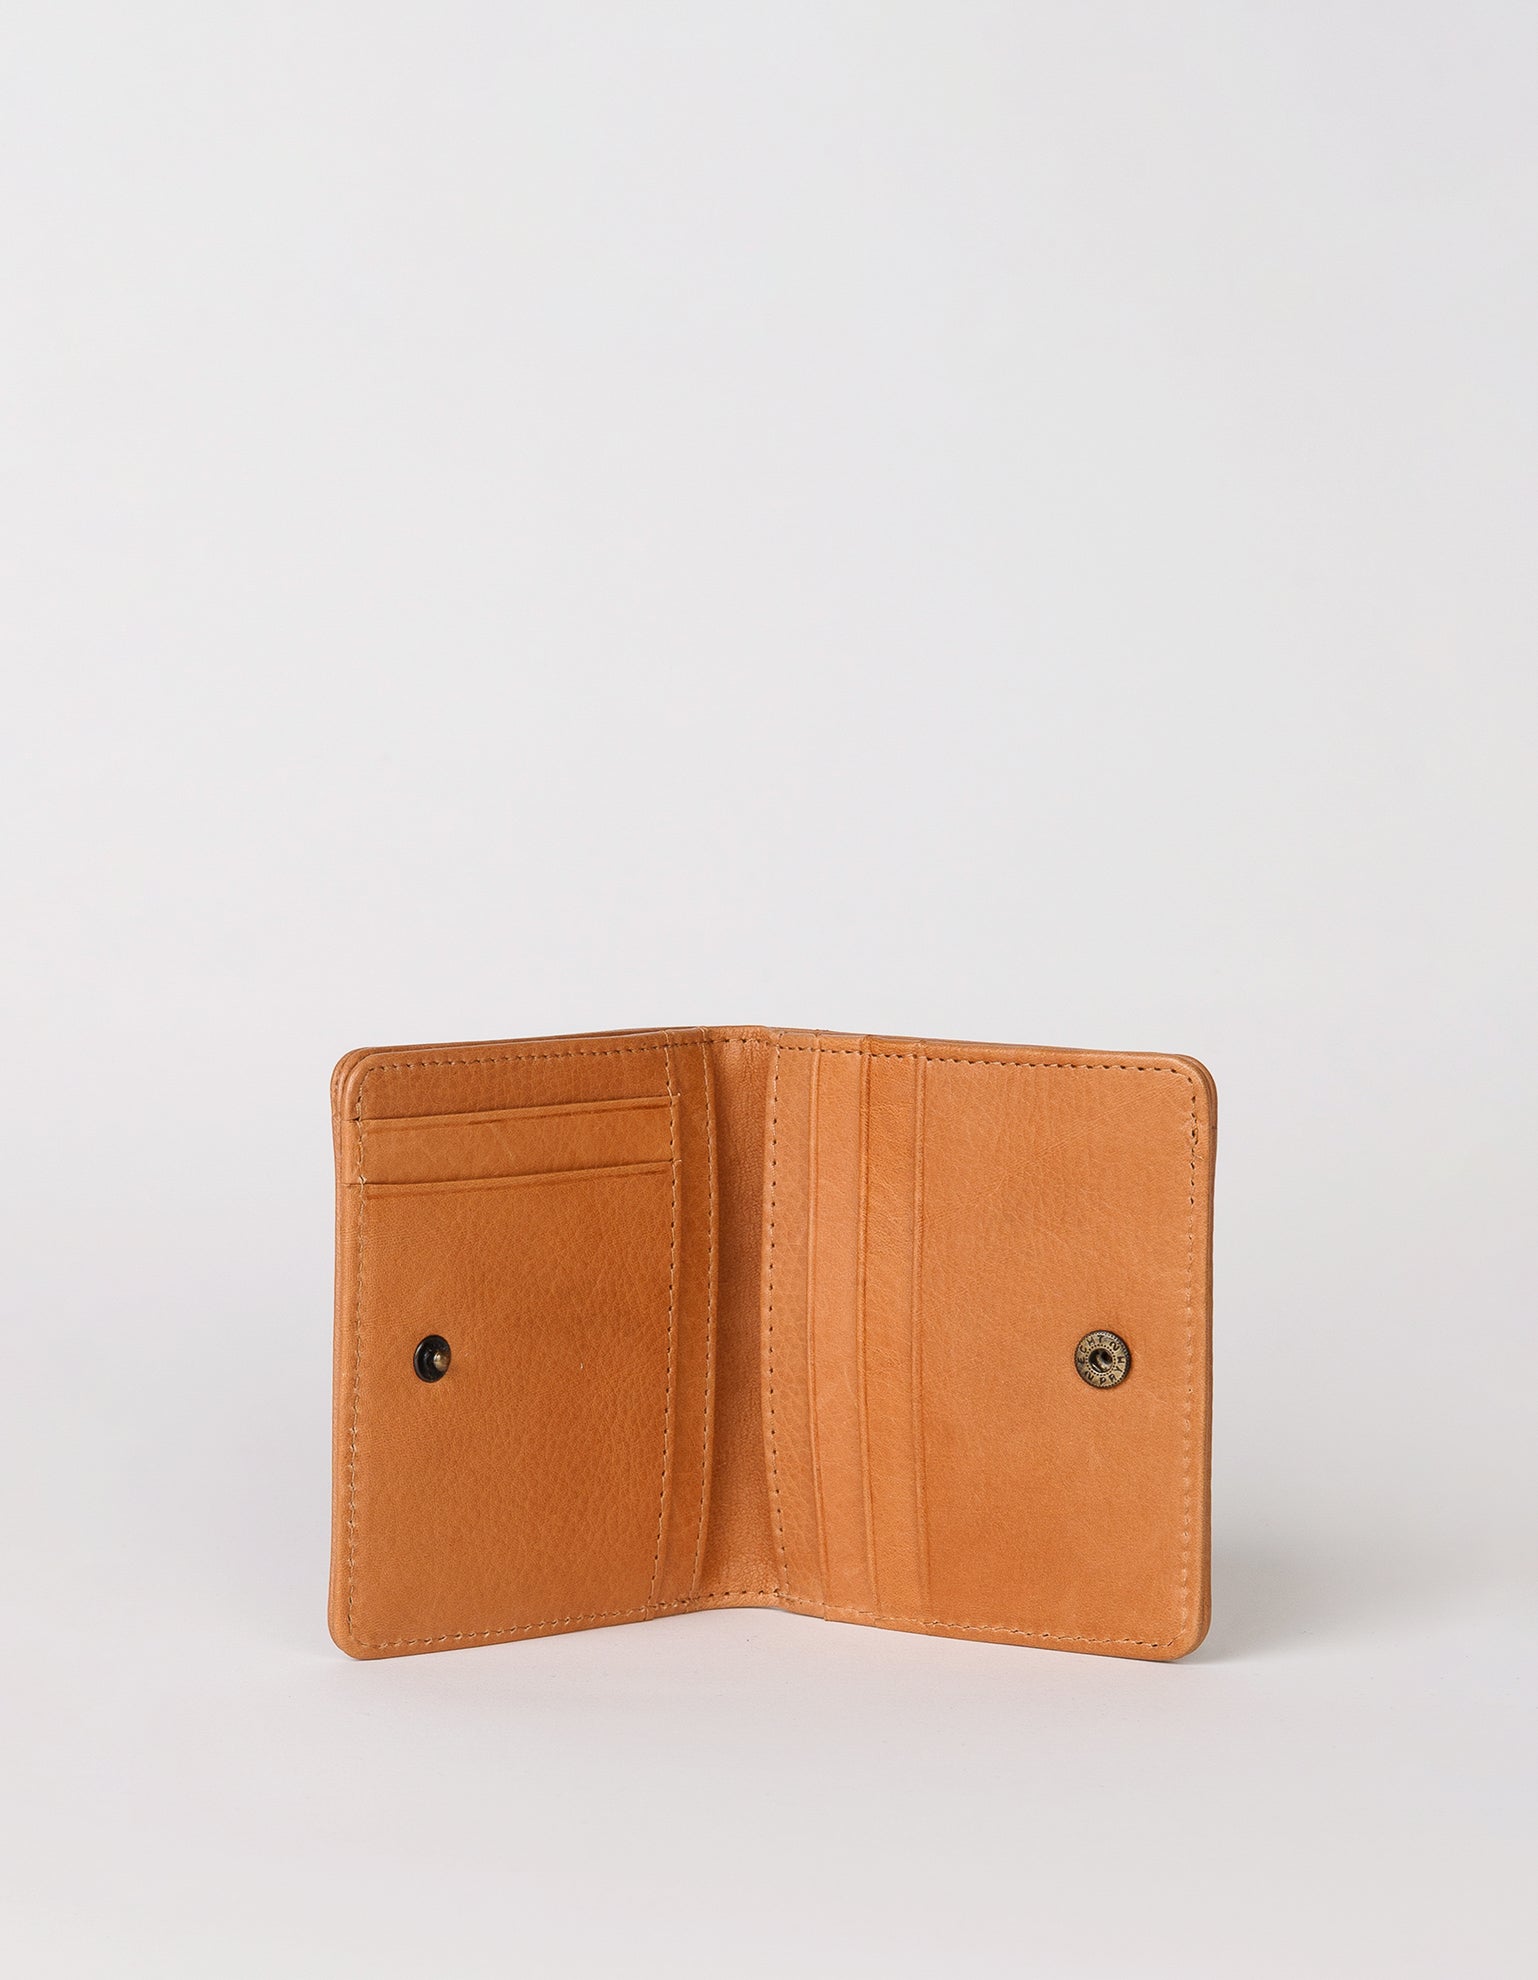 The Alex Fold-Over Wallet - Wild Oak Soft Grain Leather - inside product image